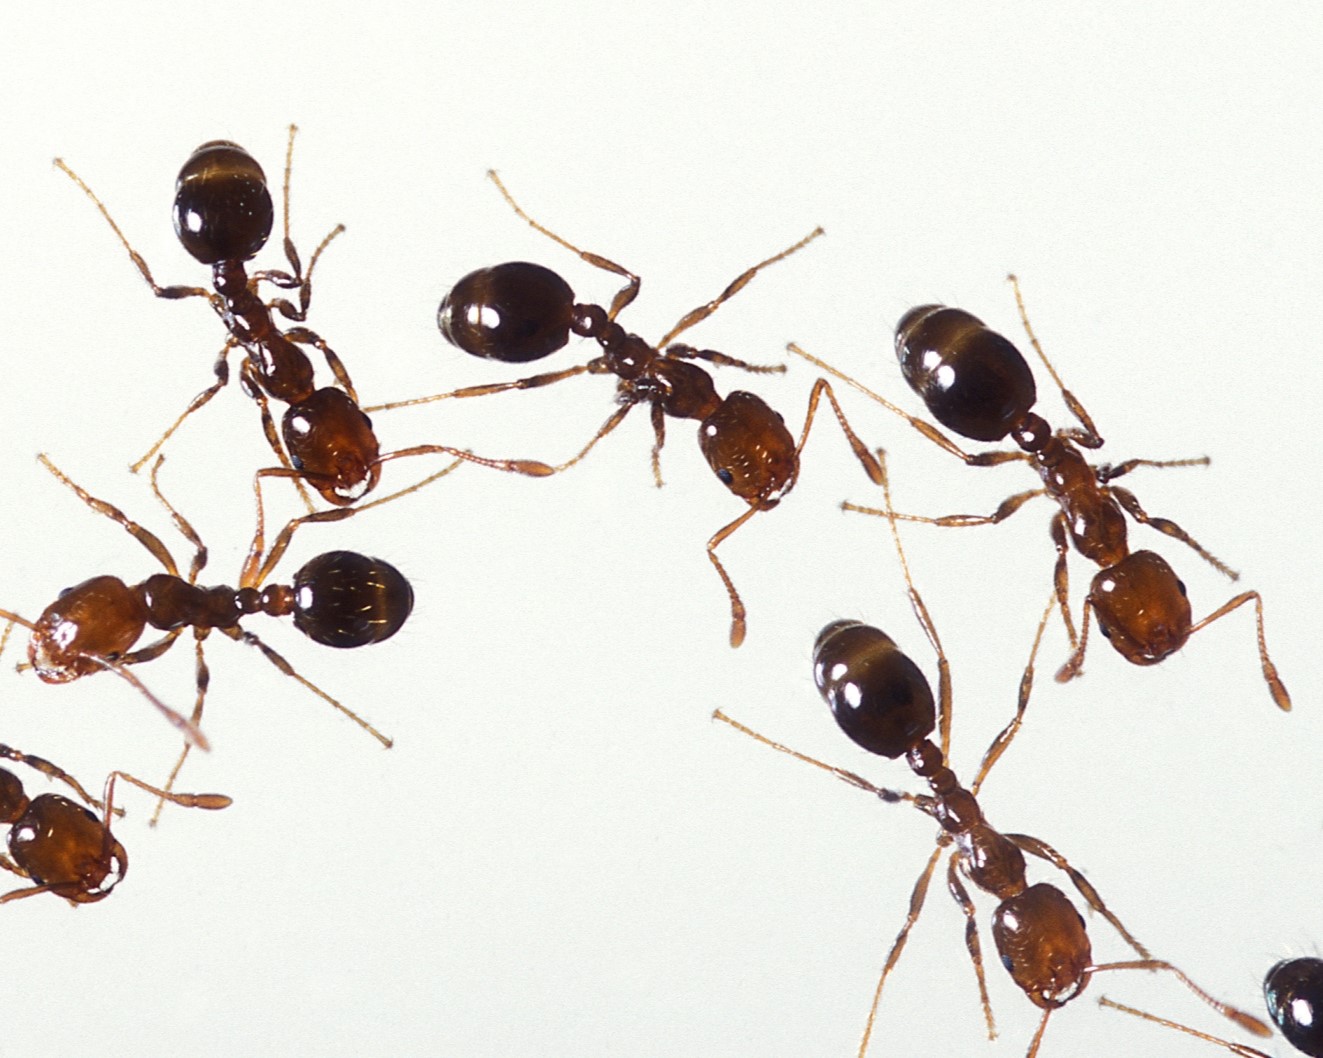  Red Imported Fire Ants